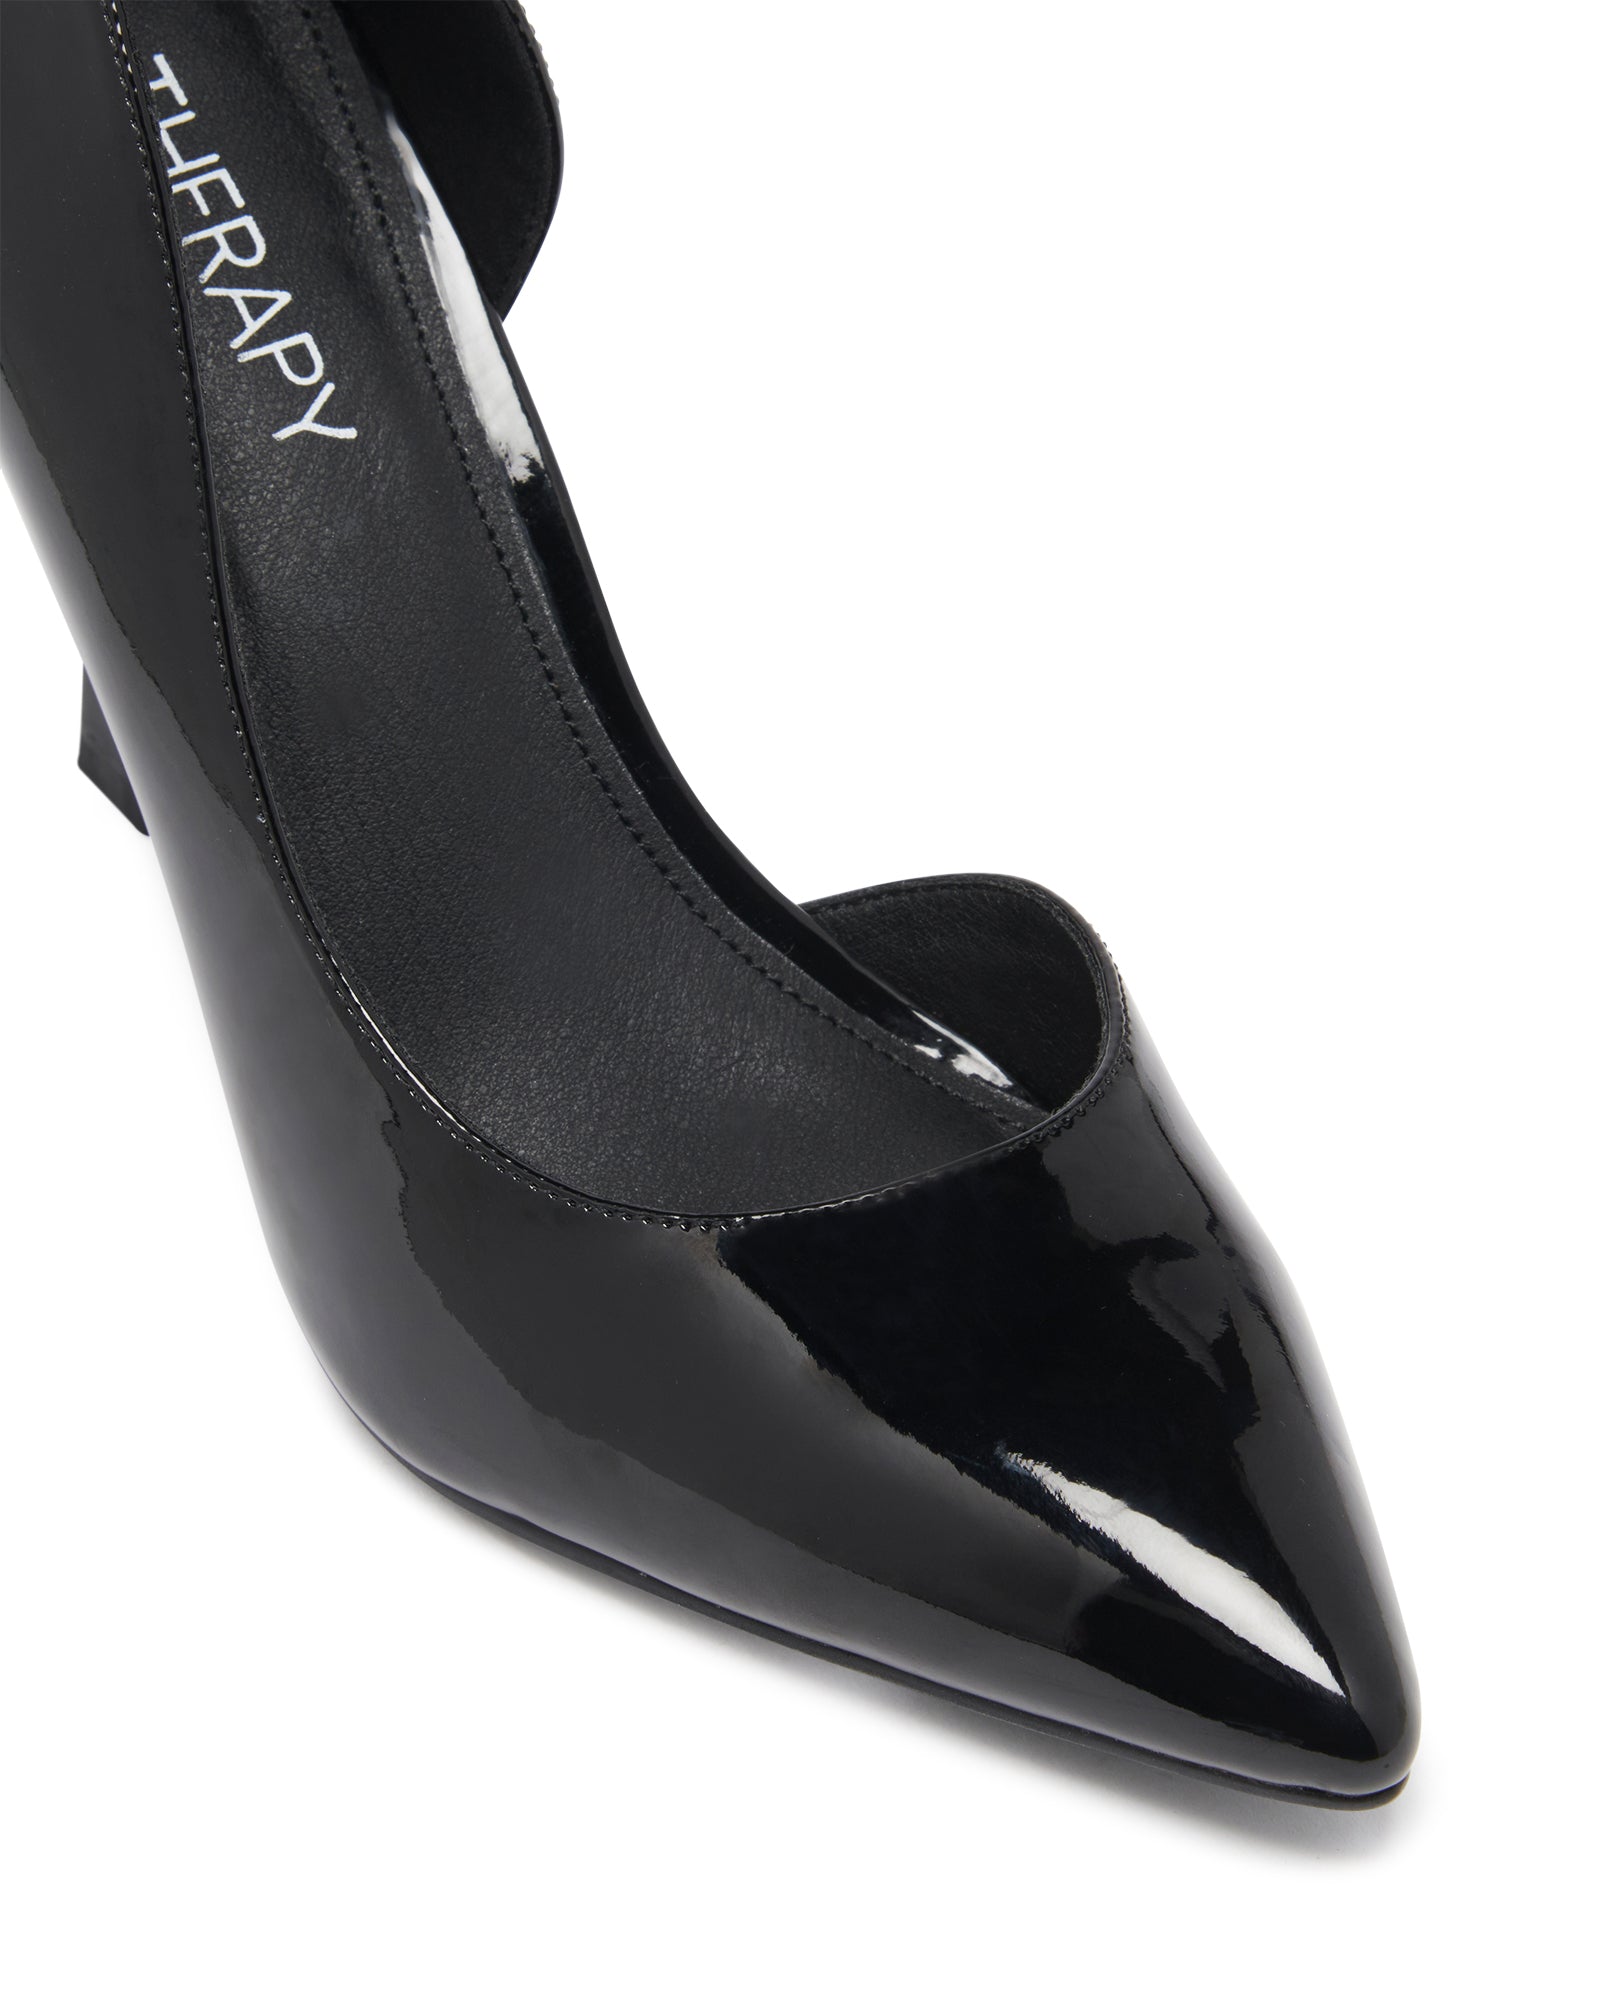 Therapy Shoes Temptress Black Patent | Women's Heels | Pumps | Stiletto | Flare Heel